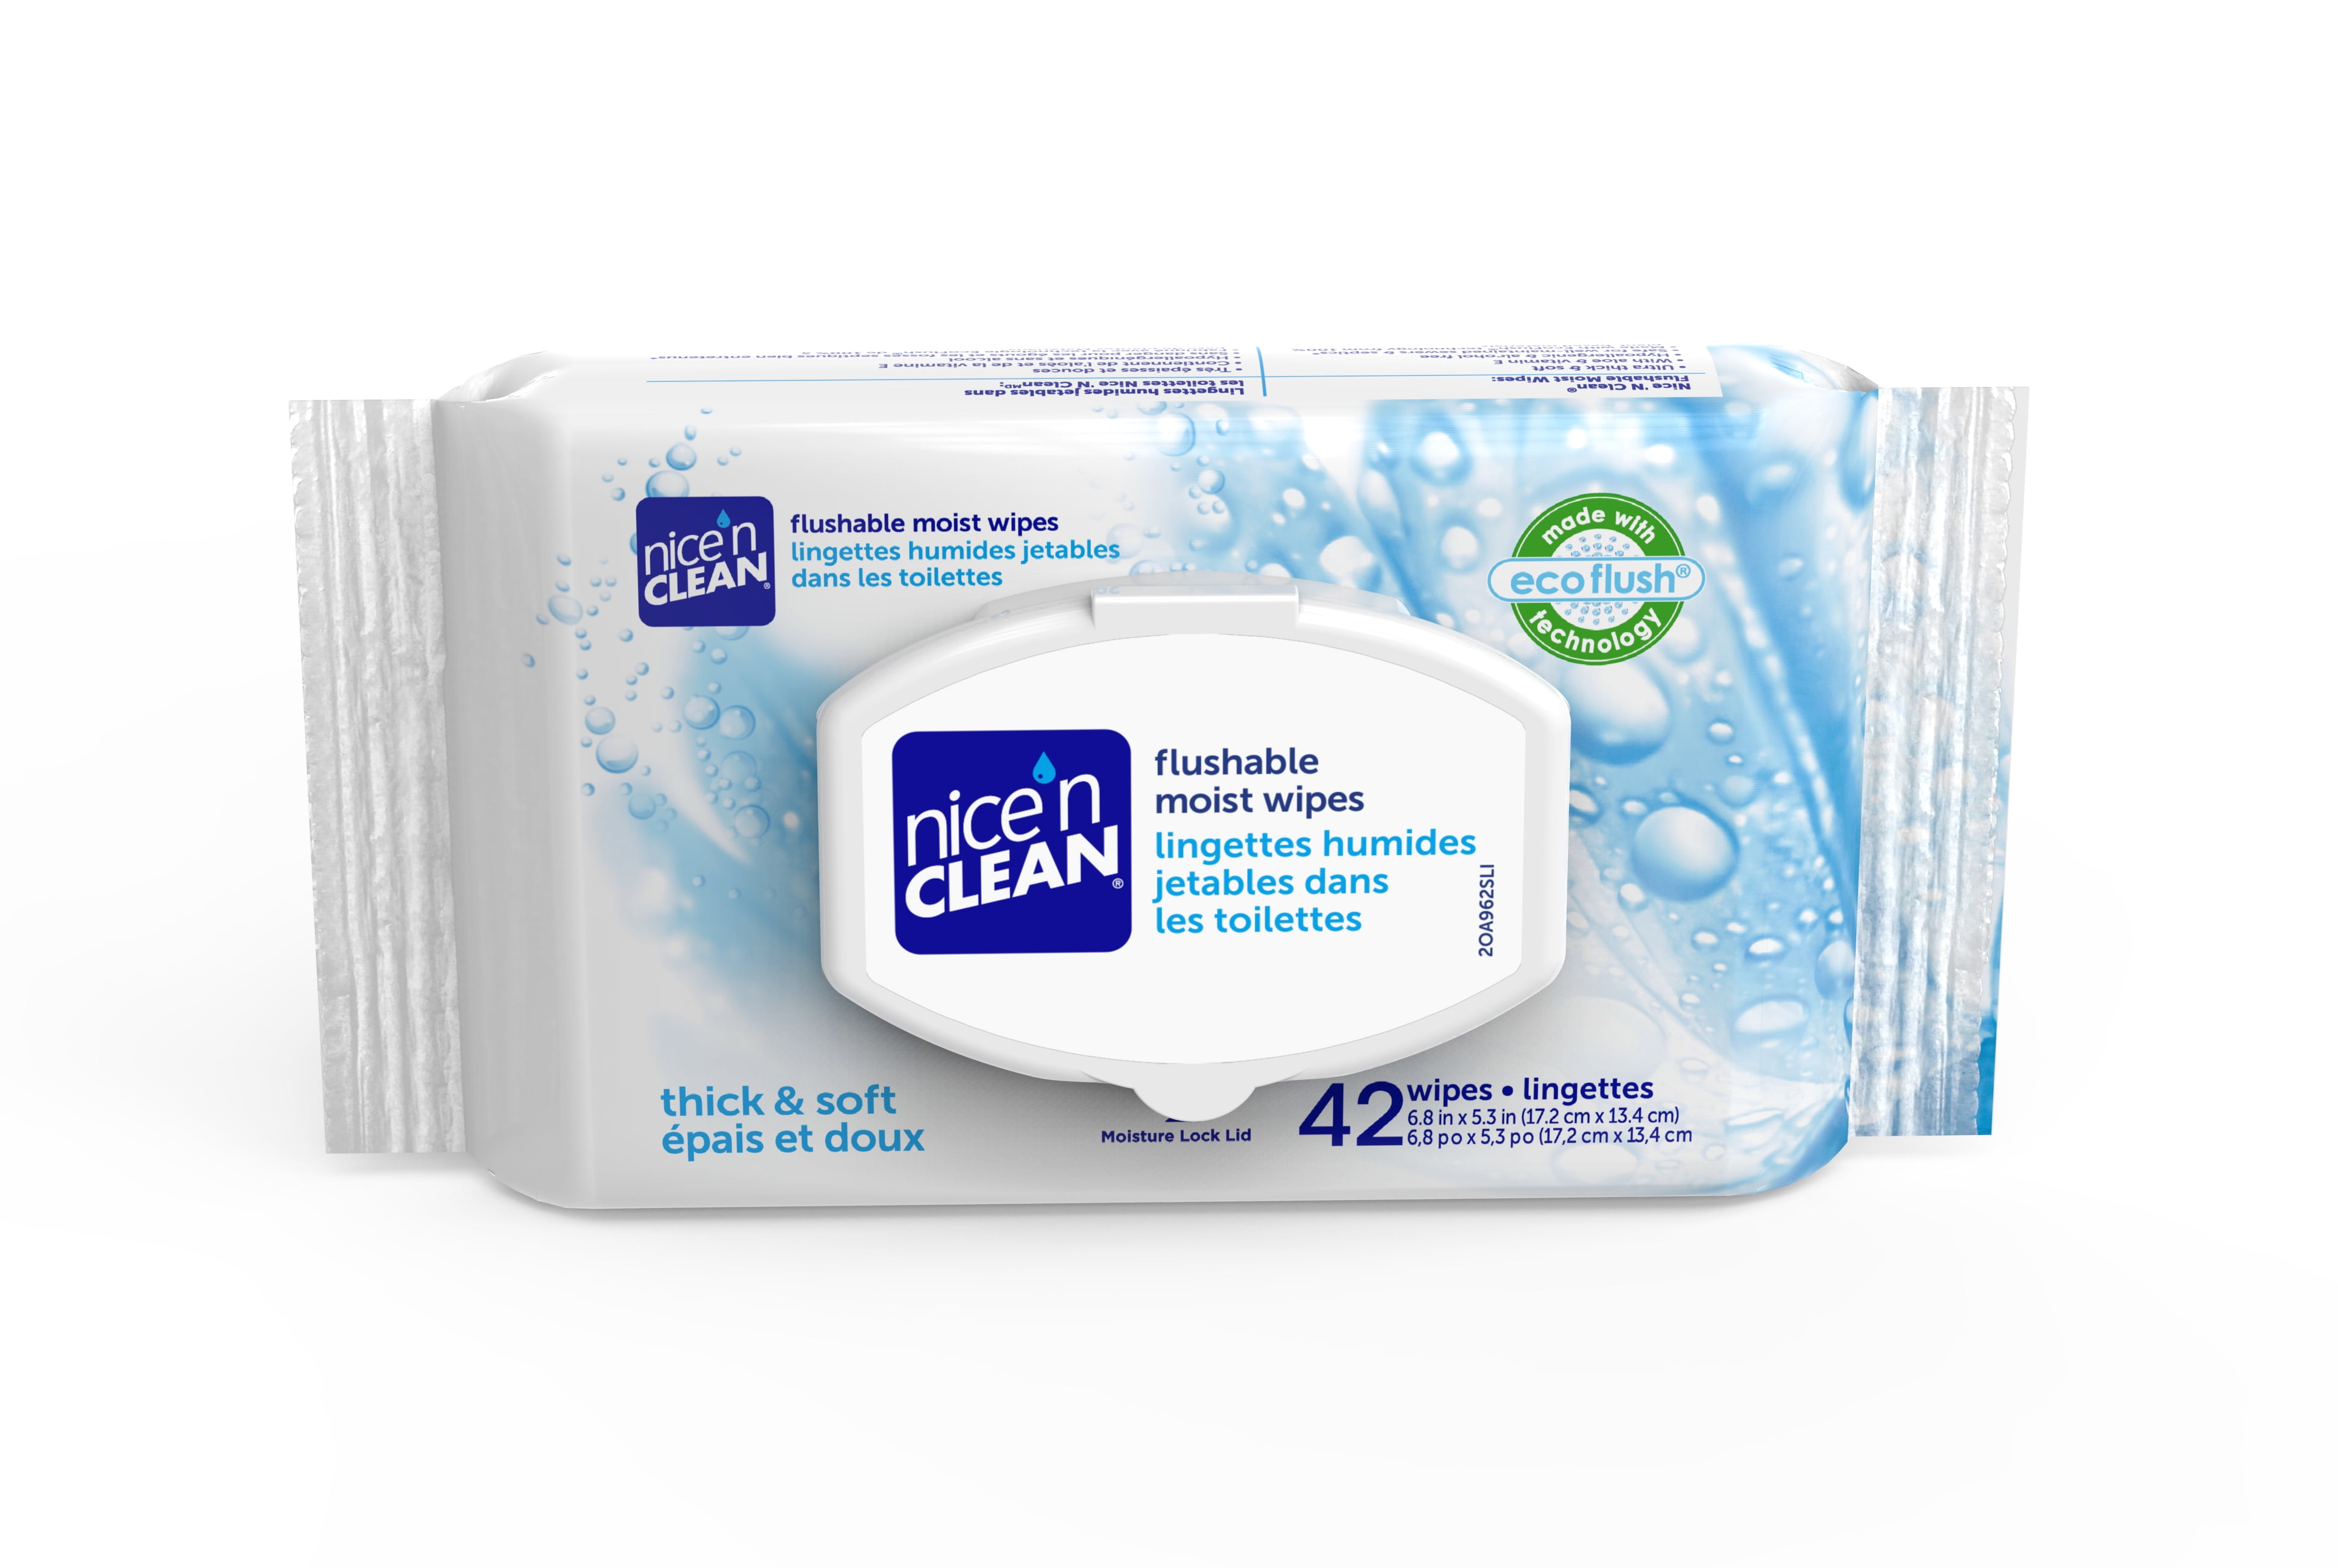 Pack of 2. 180 Count Nice 'n Clean Thick & Soft Flushable Moist Wipes 